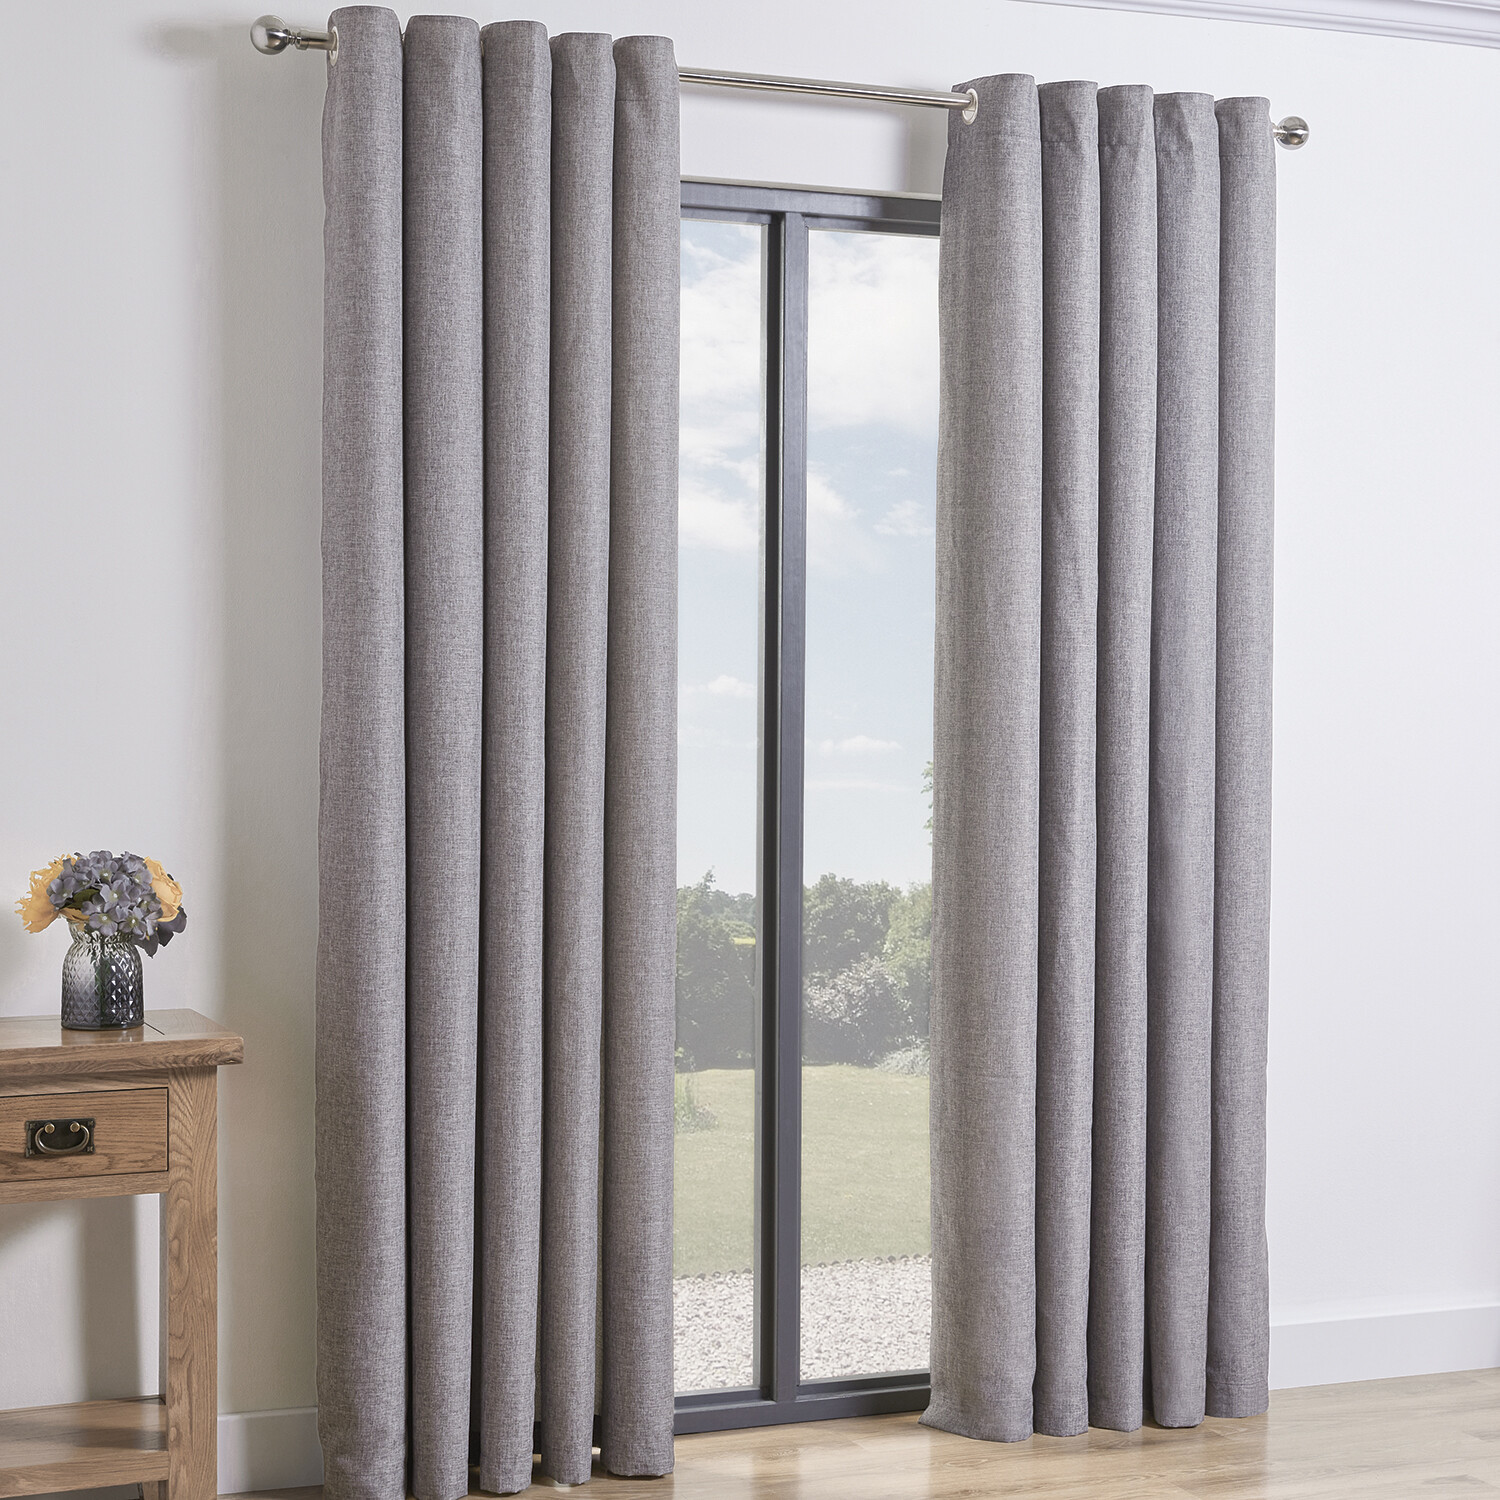 My Home Taylor Silver Blackout Eyelet Curtains 183 x 168cm Image